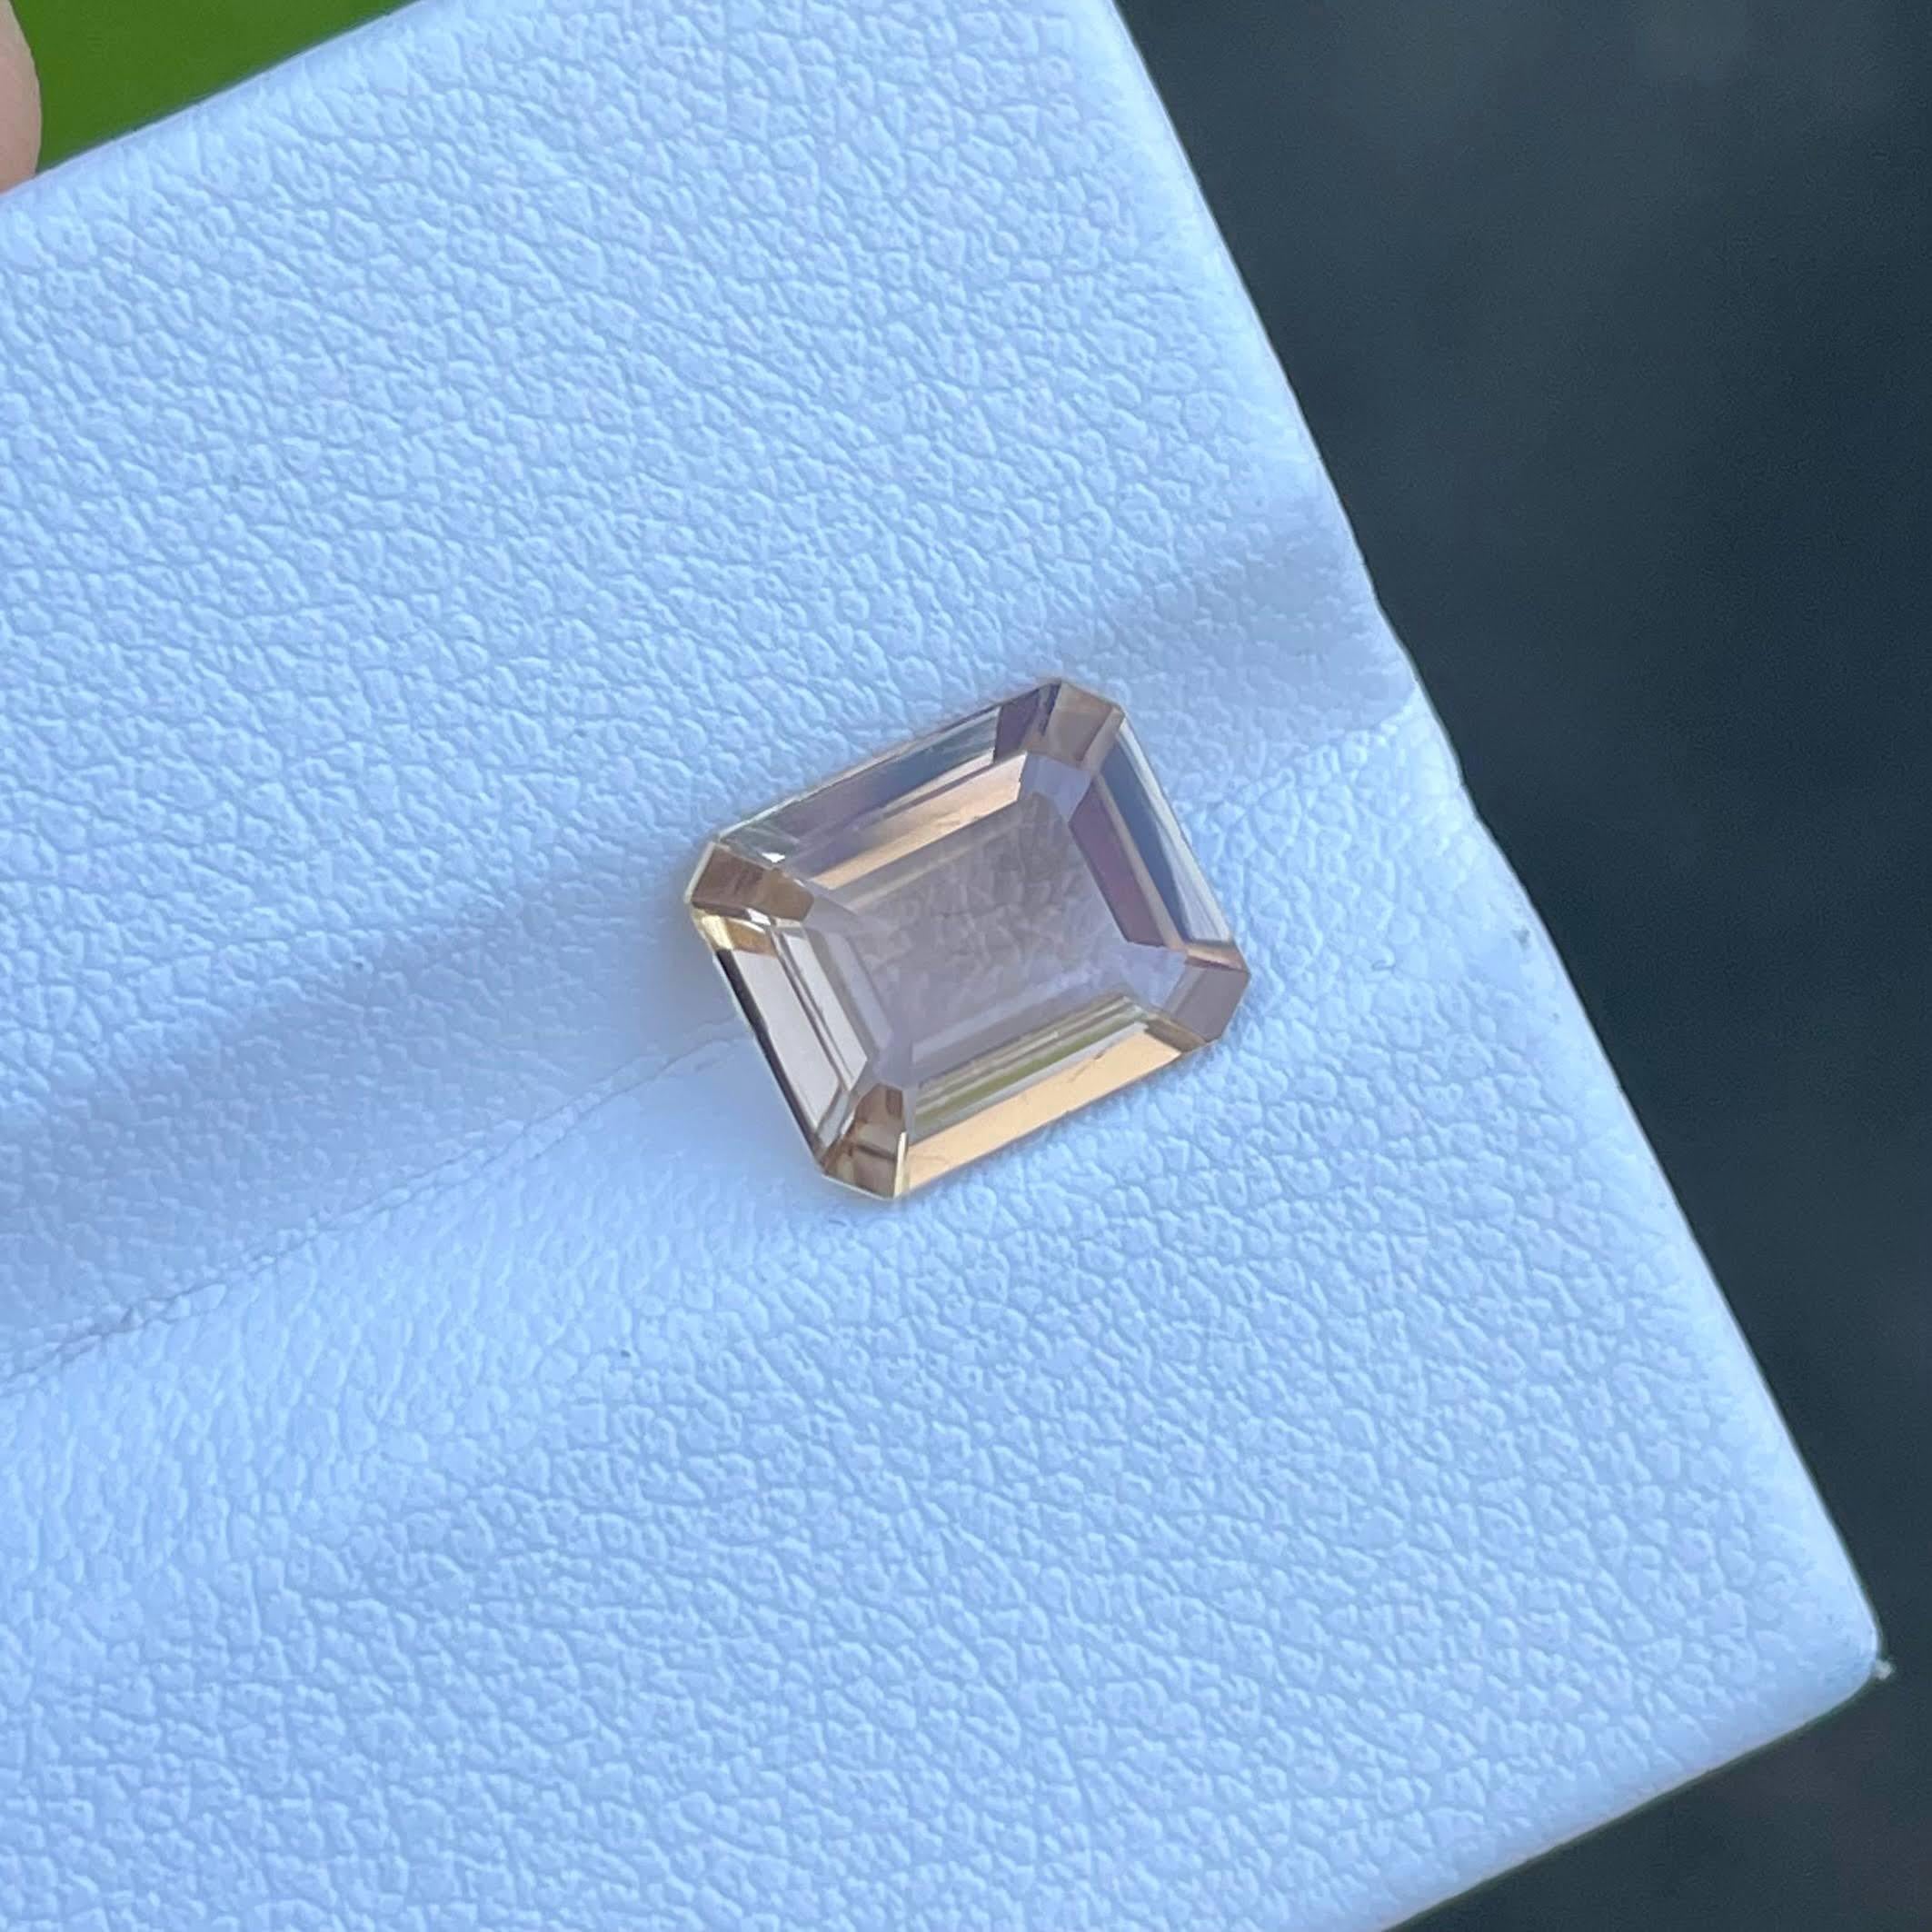 Weight: 2.50 carats 
Dimensions: 9.26x7.88x3.82 mm
Clarity: Eye Clean
Origin: Pakistan
Treatment: None
Shape: Octagon
Cut: Emerald Cut




Behold the captivating allure of a sparkling Peachy Topaz, a natural gemstone hailing from the rich geological